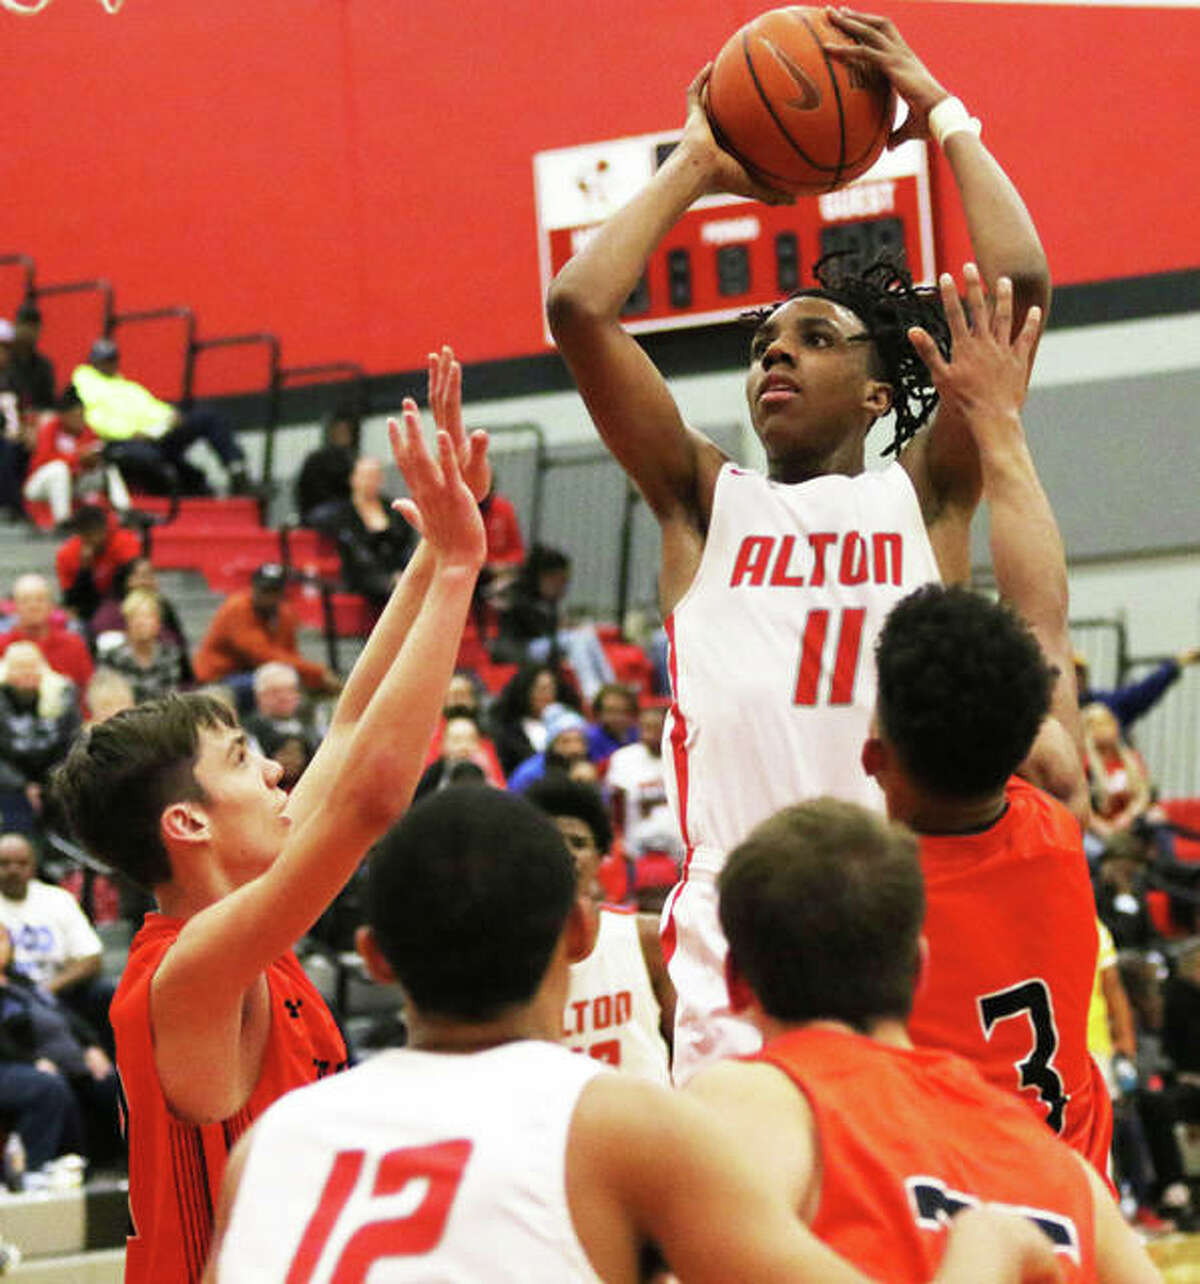 Alton’s Donovan Clay (11) rises up in the lane for a shot over Edwardsville defenders during the Redbirds’ Southwestern Conference victory on Tuesday at Alton High in Godfrey. The Redbirds were in Galesburg on Saturday and Clay scored 23 points in a shootout win over Rock Island.